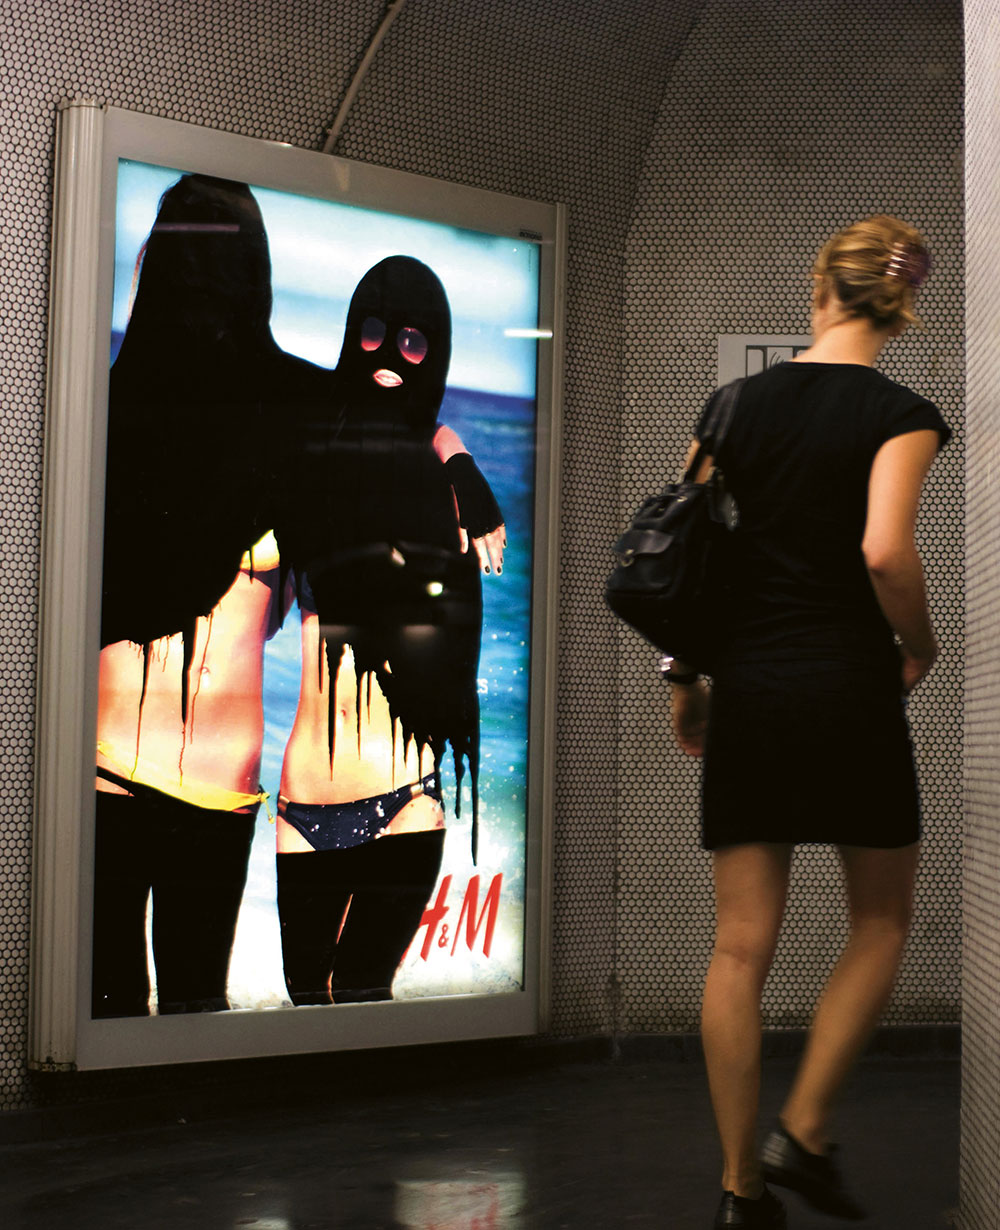 ‘Hijabizing’ intervention in the Paris Metro by Princess Hijab, France, 2006-11. From Visual Impact (Phaidon, 2015)